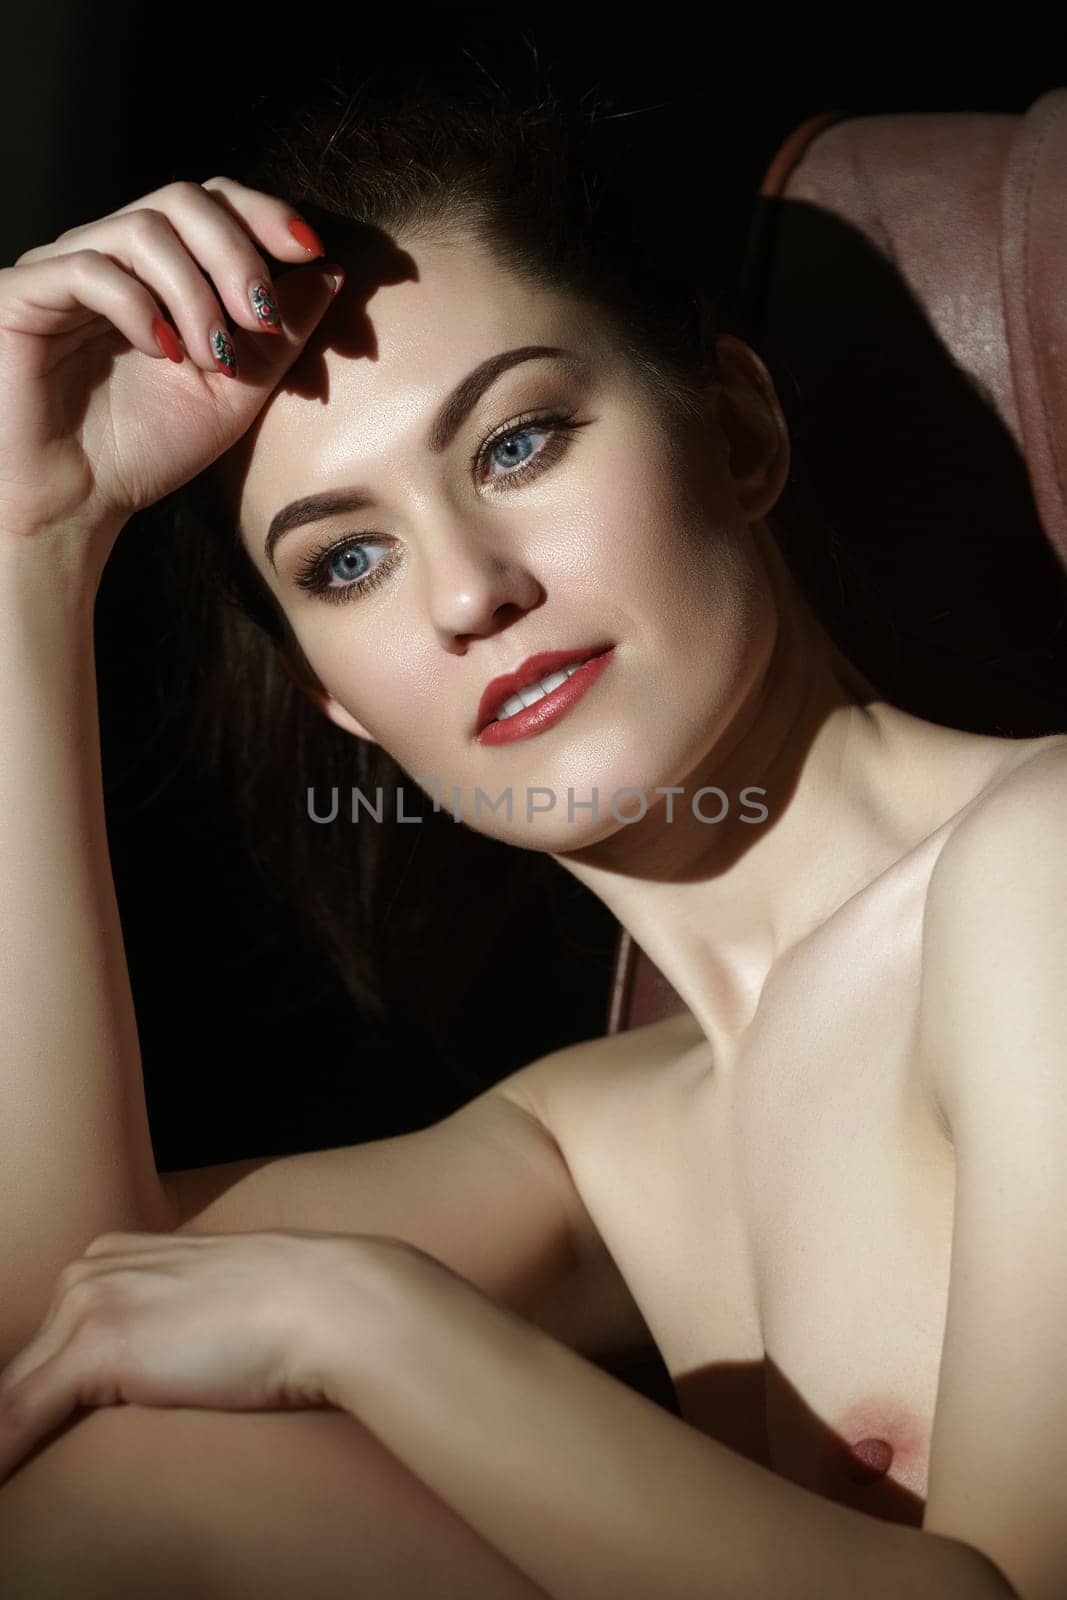 Nude brunette posing with dreamy expression on her face